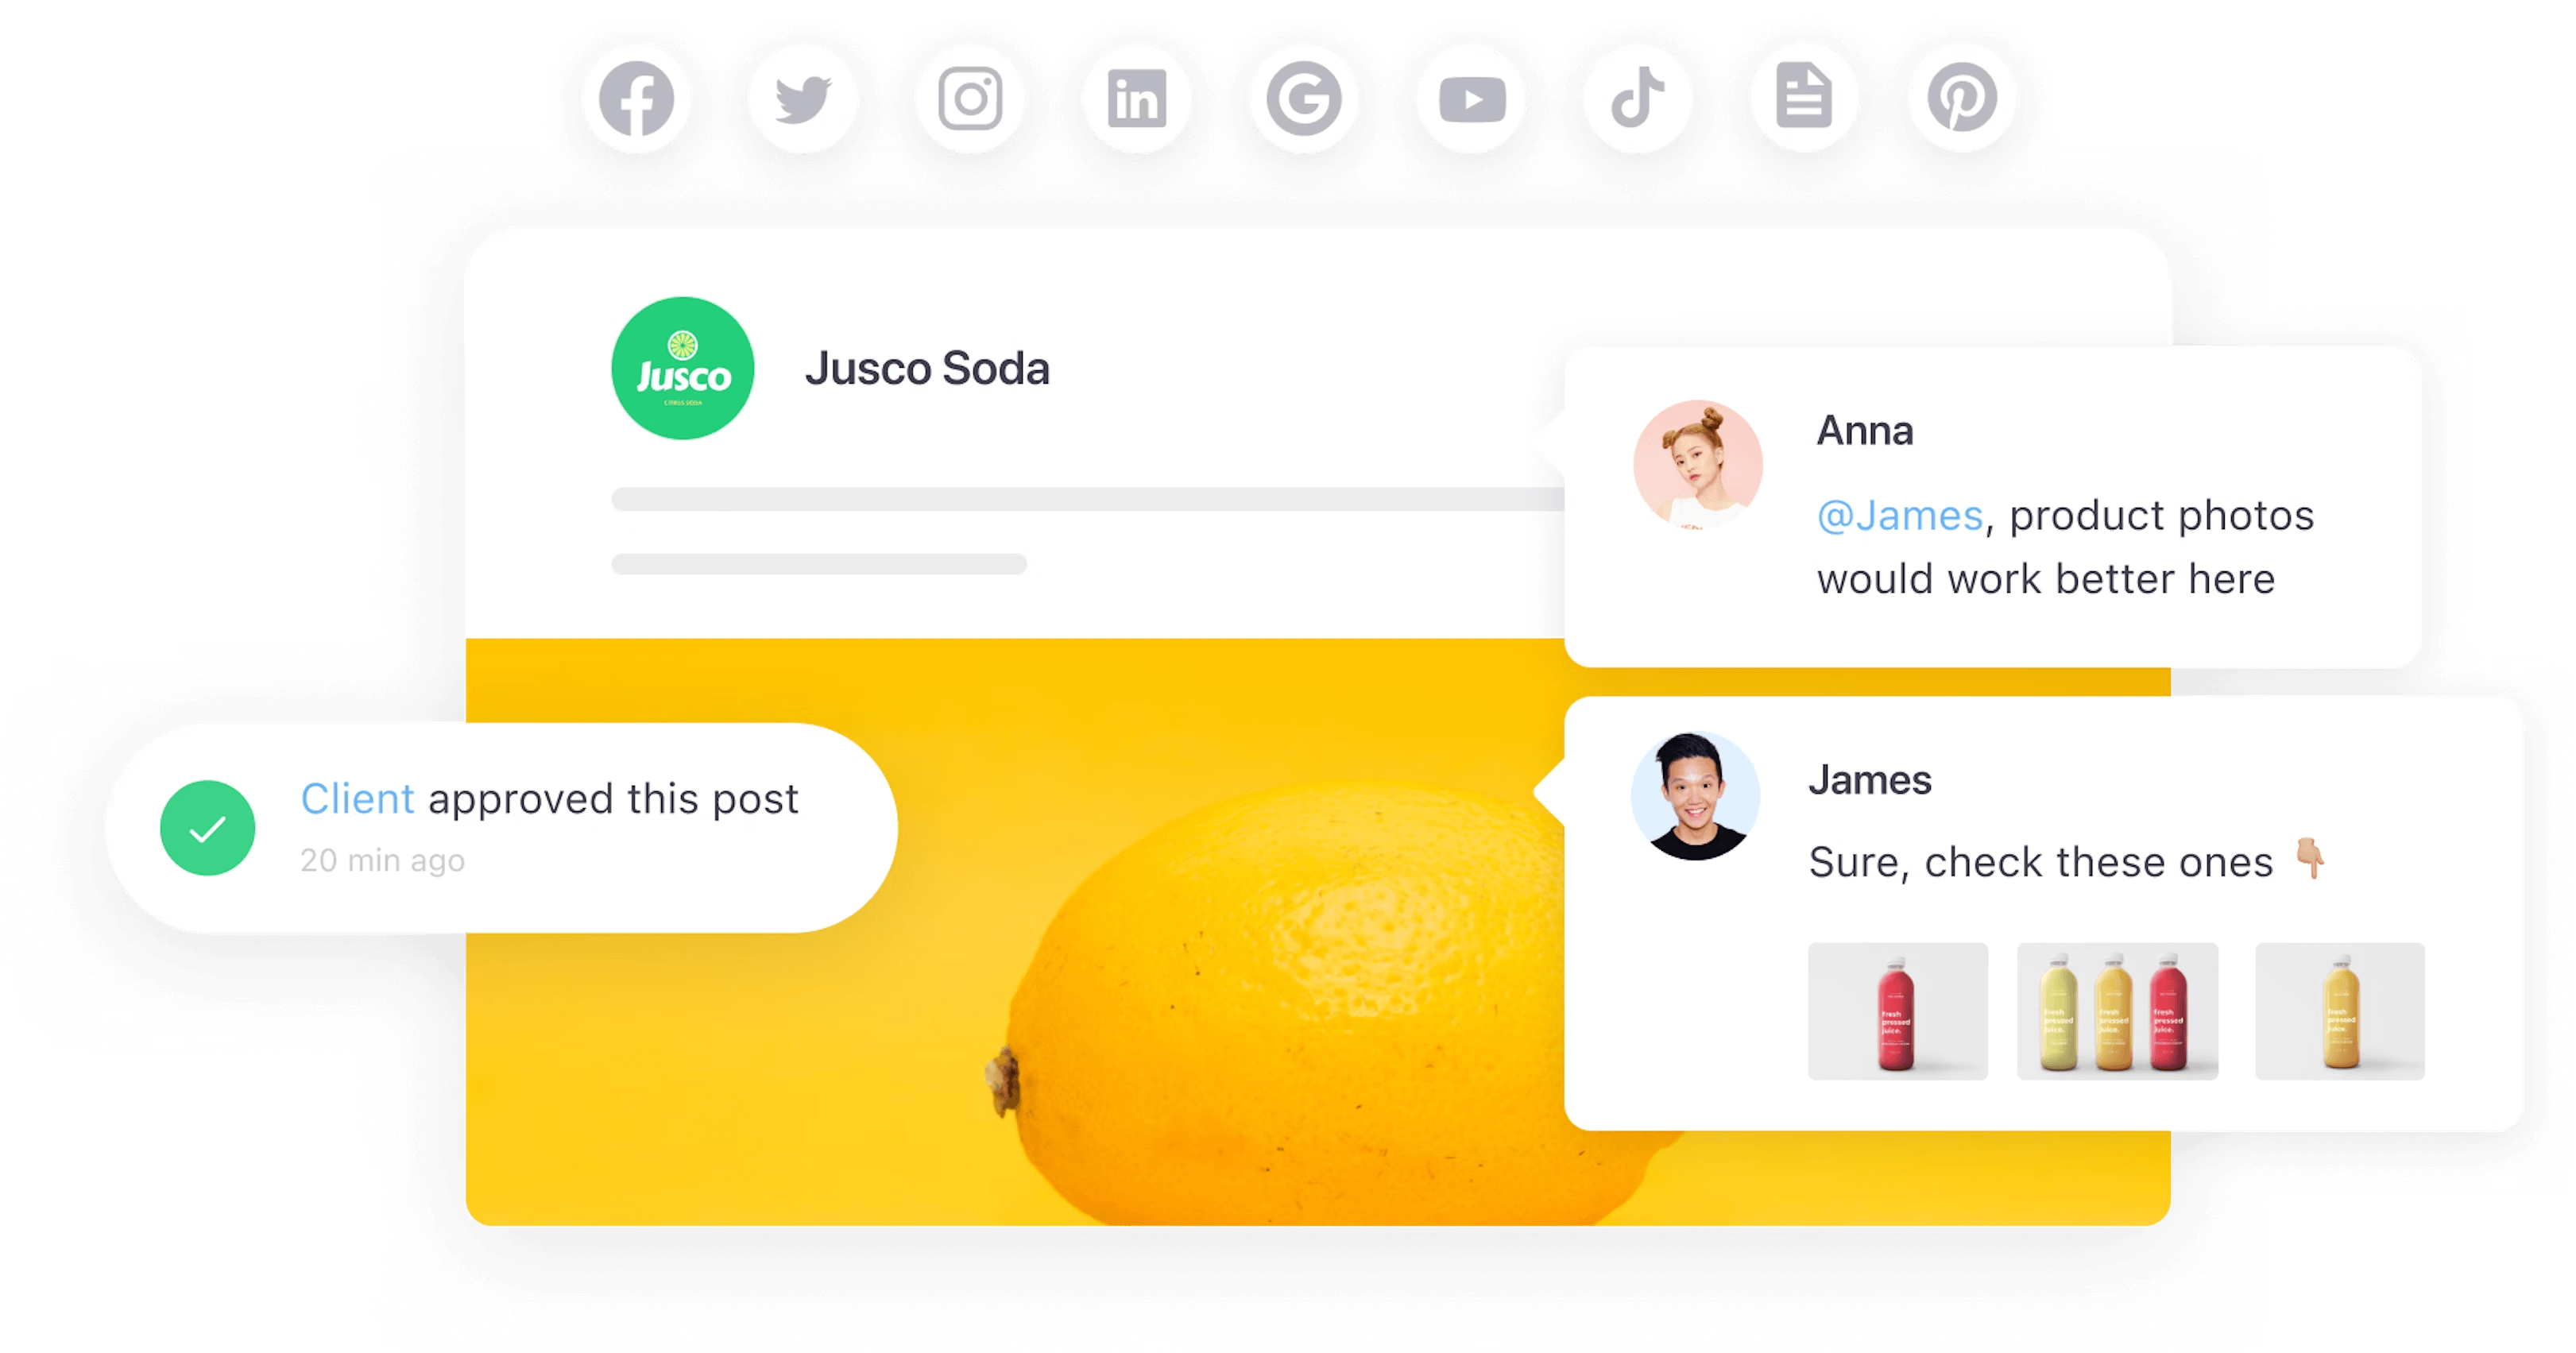 Screenshot of a social media post for Jusco Soda with a lemon image, client approval notification, and chat about product photos.